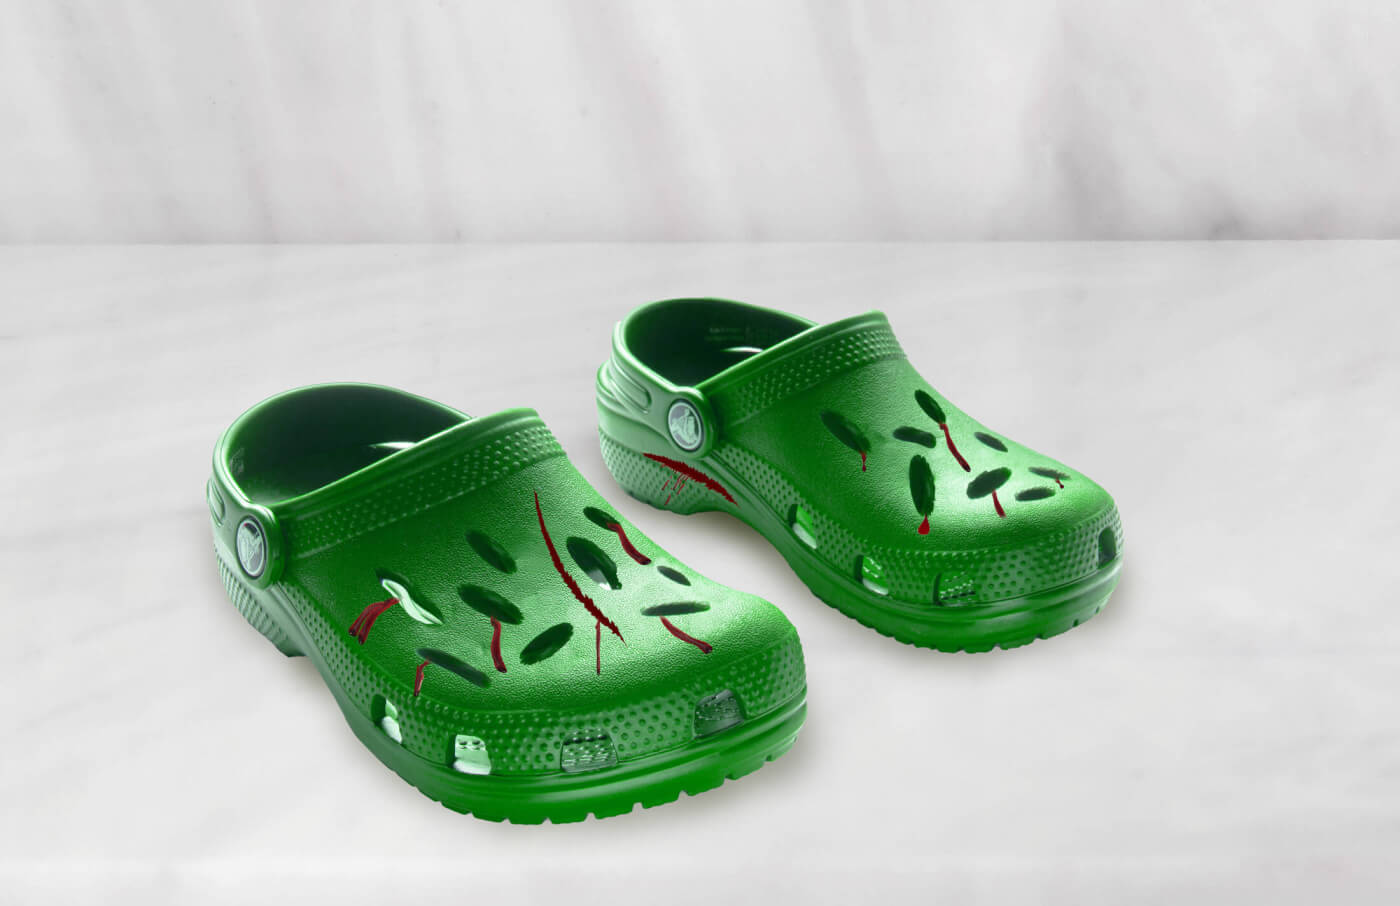 a pair of green crocs that appear to be covered in cuts and fake blood as part of the Cruelty Rebranded campaign